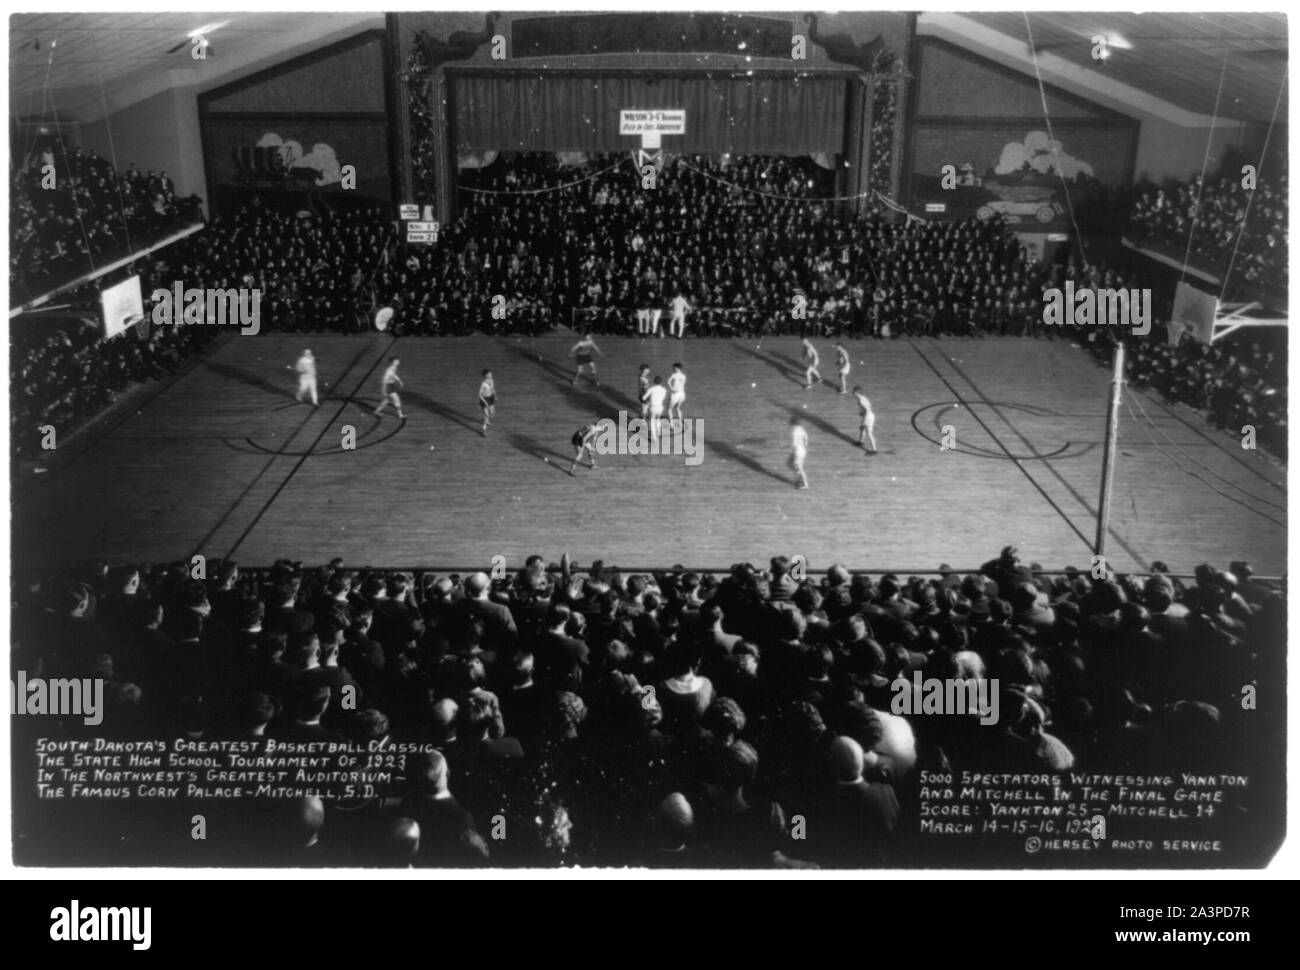 South Dakota's greatest basketball classic - the State High School Tournament of 1923, in the Northwest's greatest auditorium - the famous Corn Palace, Mitchell, S.D.--5000 spectators witnessing Yankton and Mitchell Stock Photo